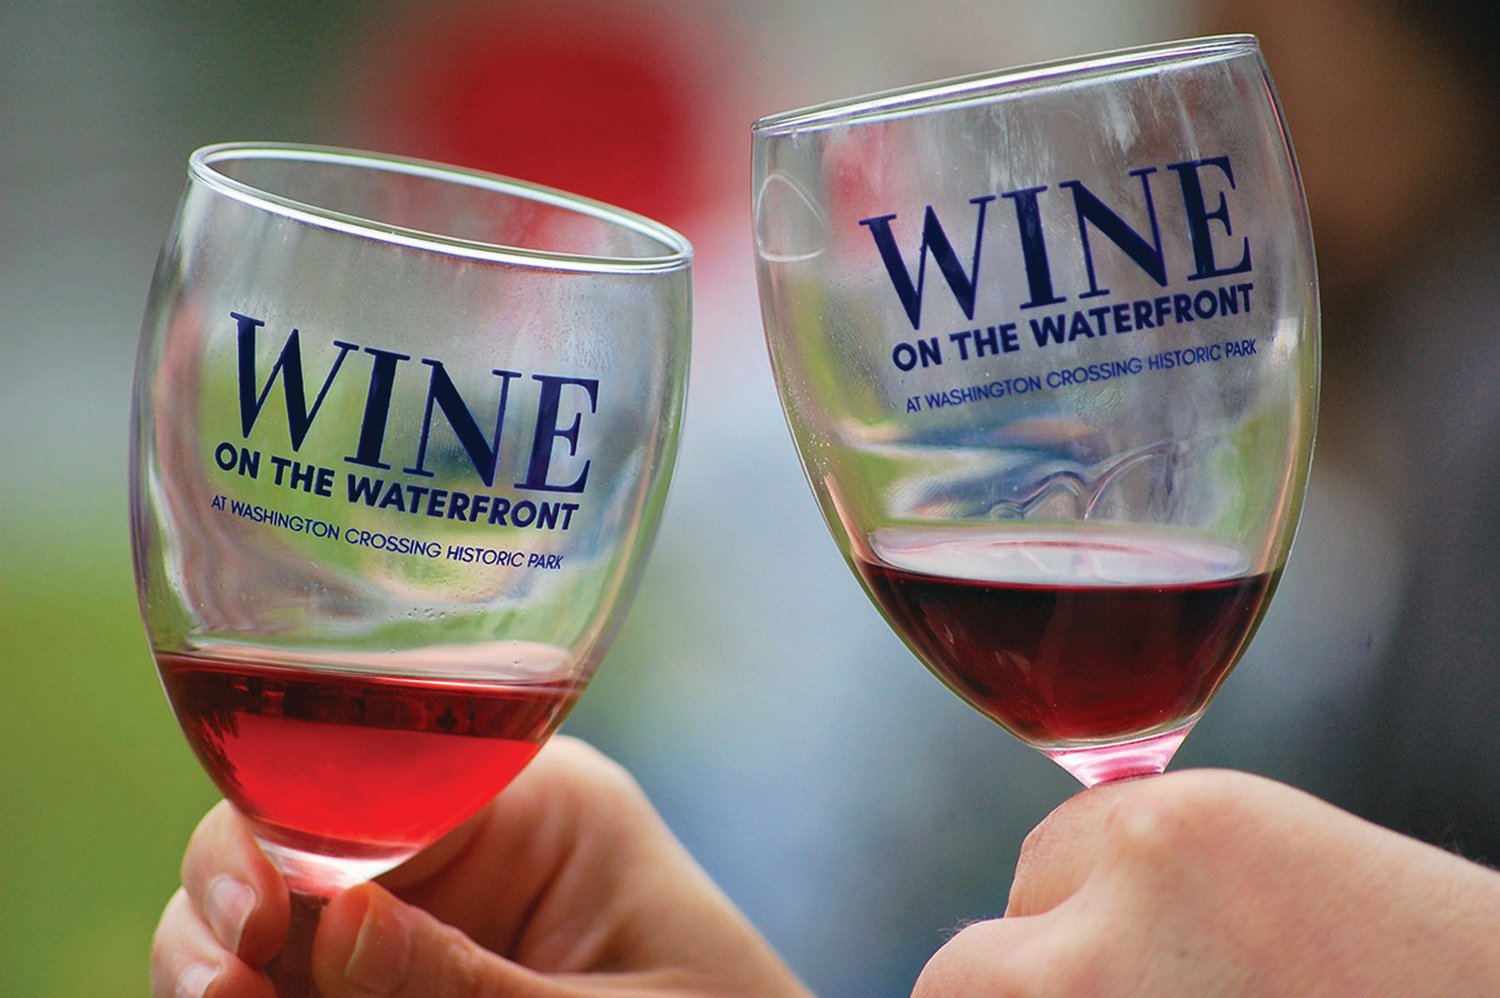 Wine on the Waterfront pairs wine tastings with river views.